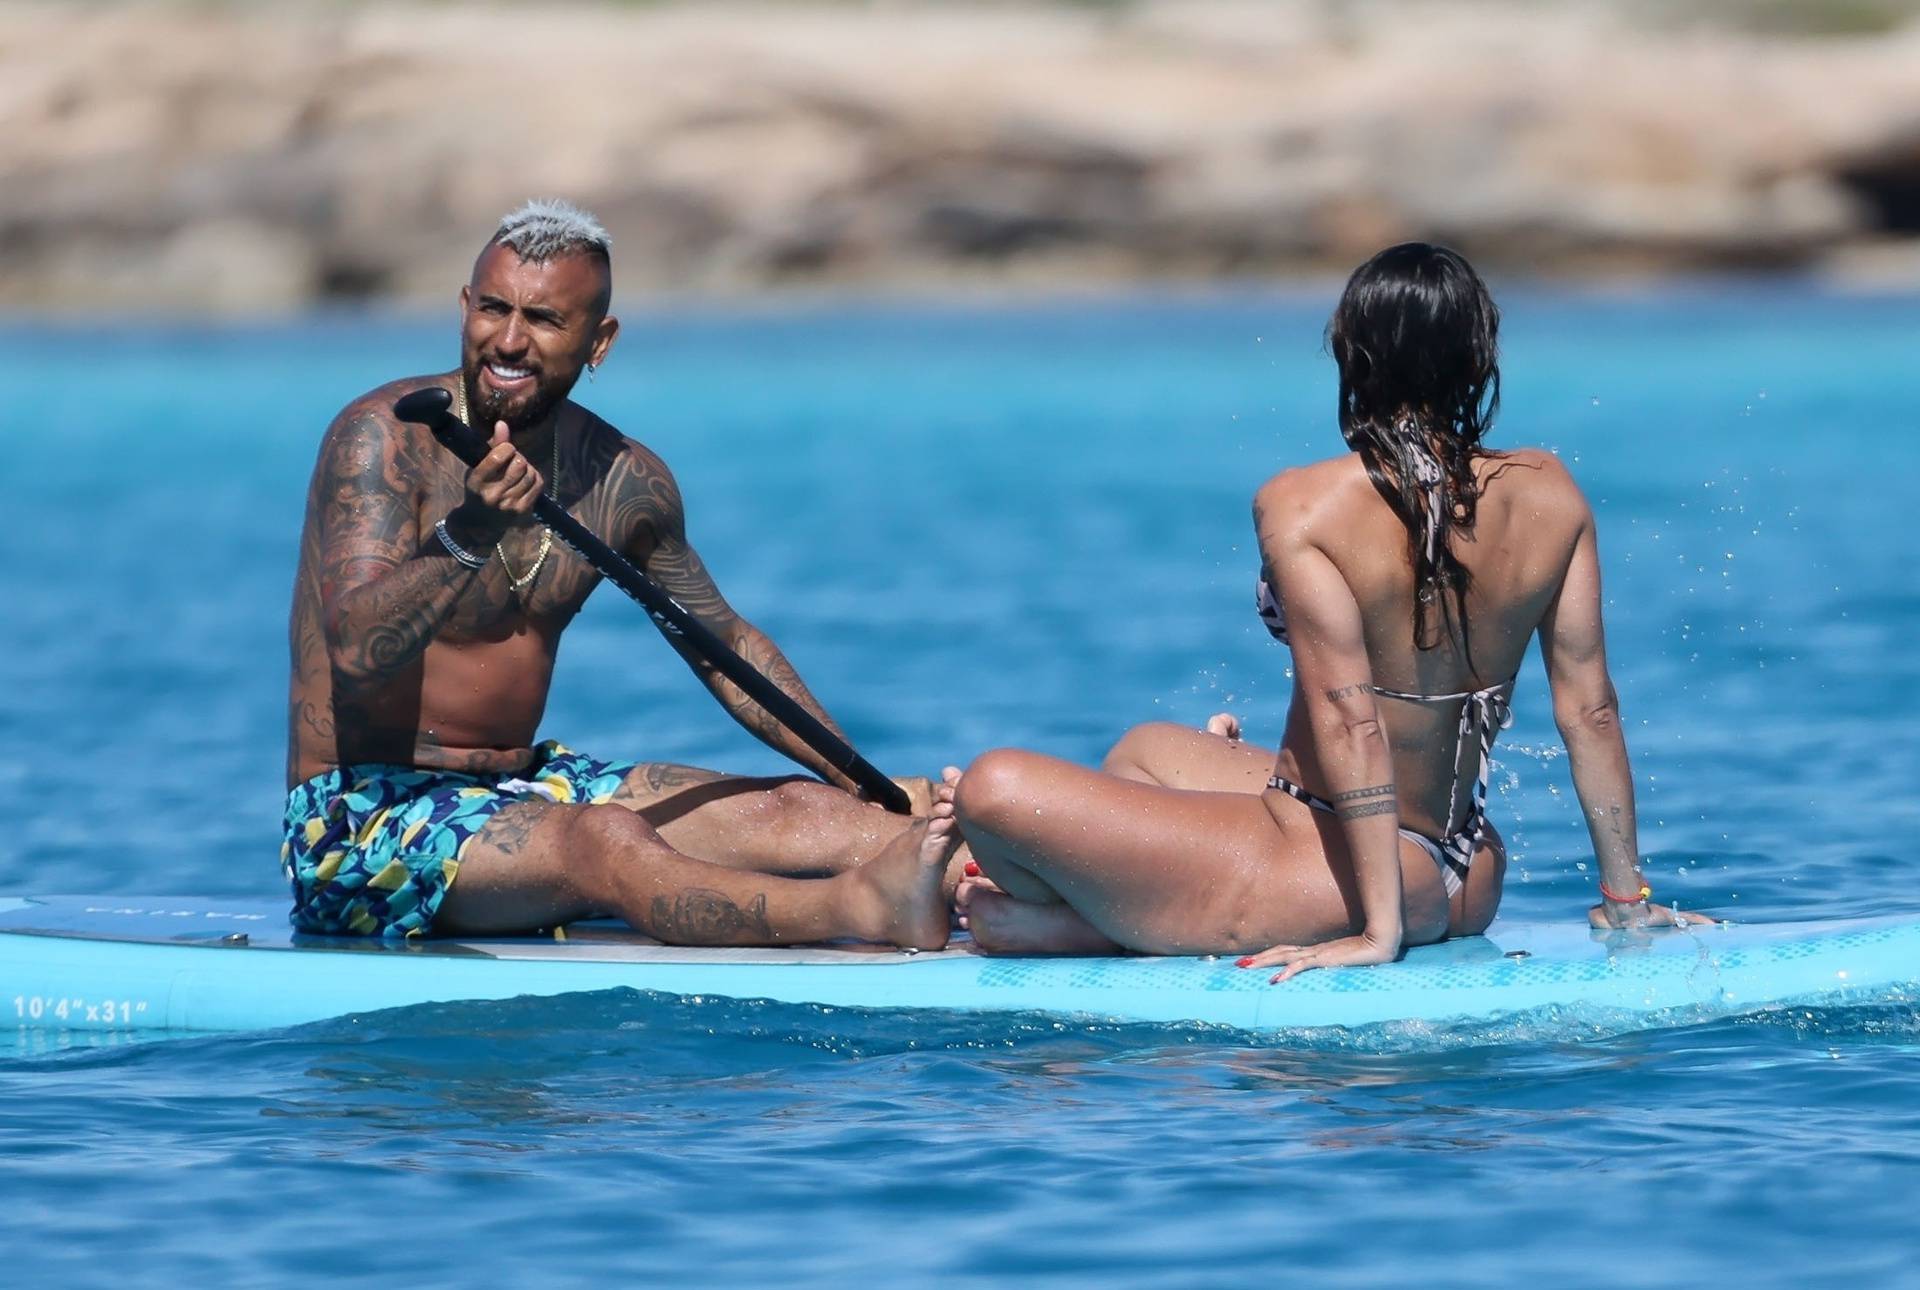 *EXCLUSIVE* Inter Milan's Chilean footballer Arturo Vidal and his wife Maria Teresa Matus soak up the hot Spanish sunshine on their lavish yacht on their holidays in Formentera. *PICTURES TAKEN ON THE 28/05/2022*